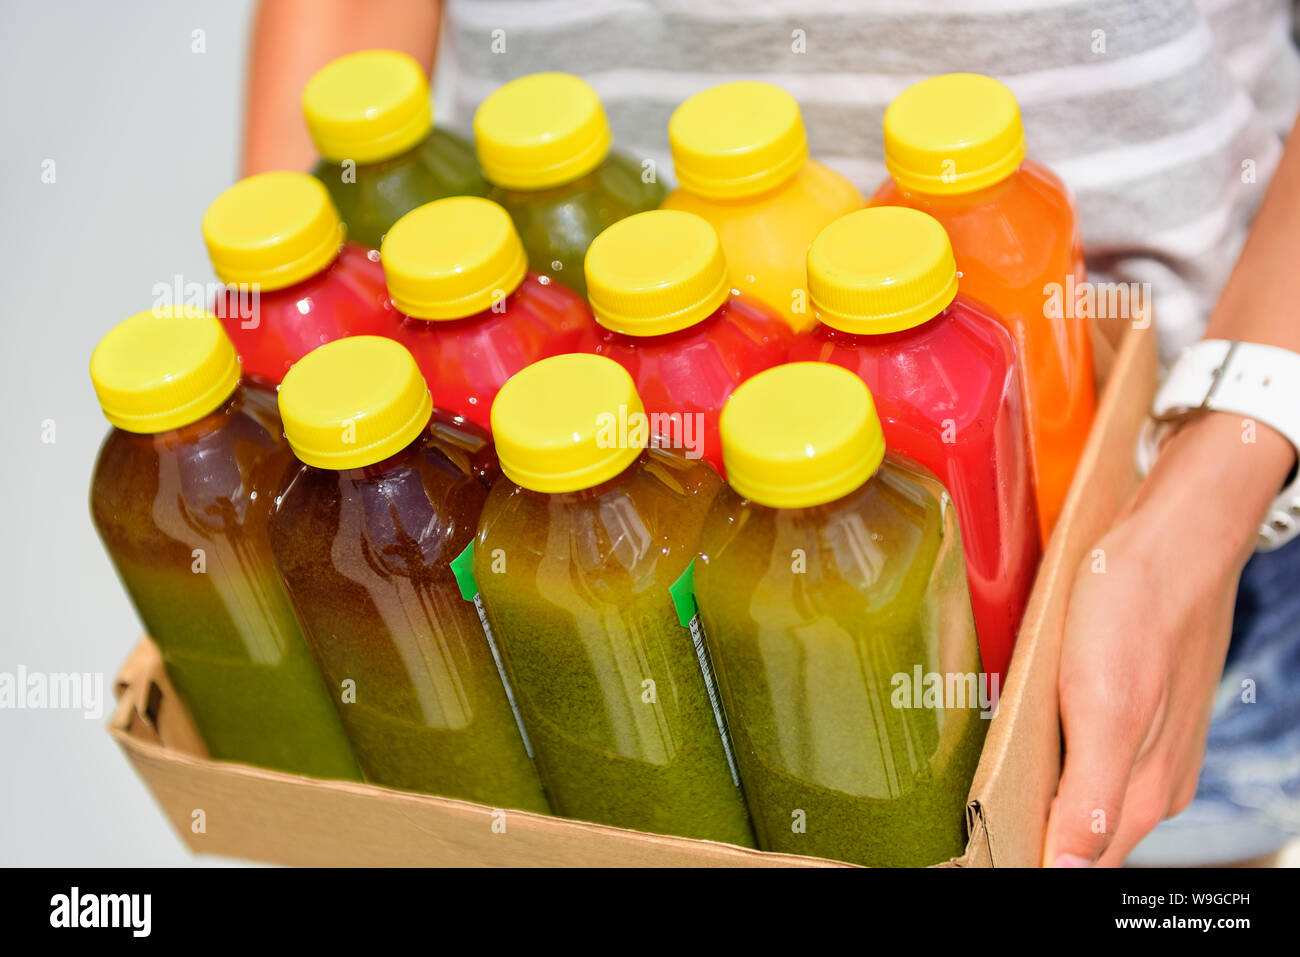 Organic cold-pressed raw vegetable juice plastic bottles. Latest food trend consisting of juicing at high pressure fresh fruits and vegetables without heating to preserve nutrients and vitamins. Stock Photo